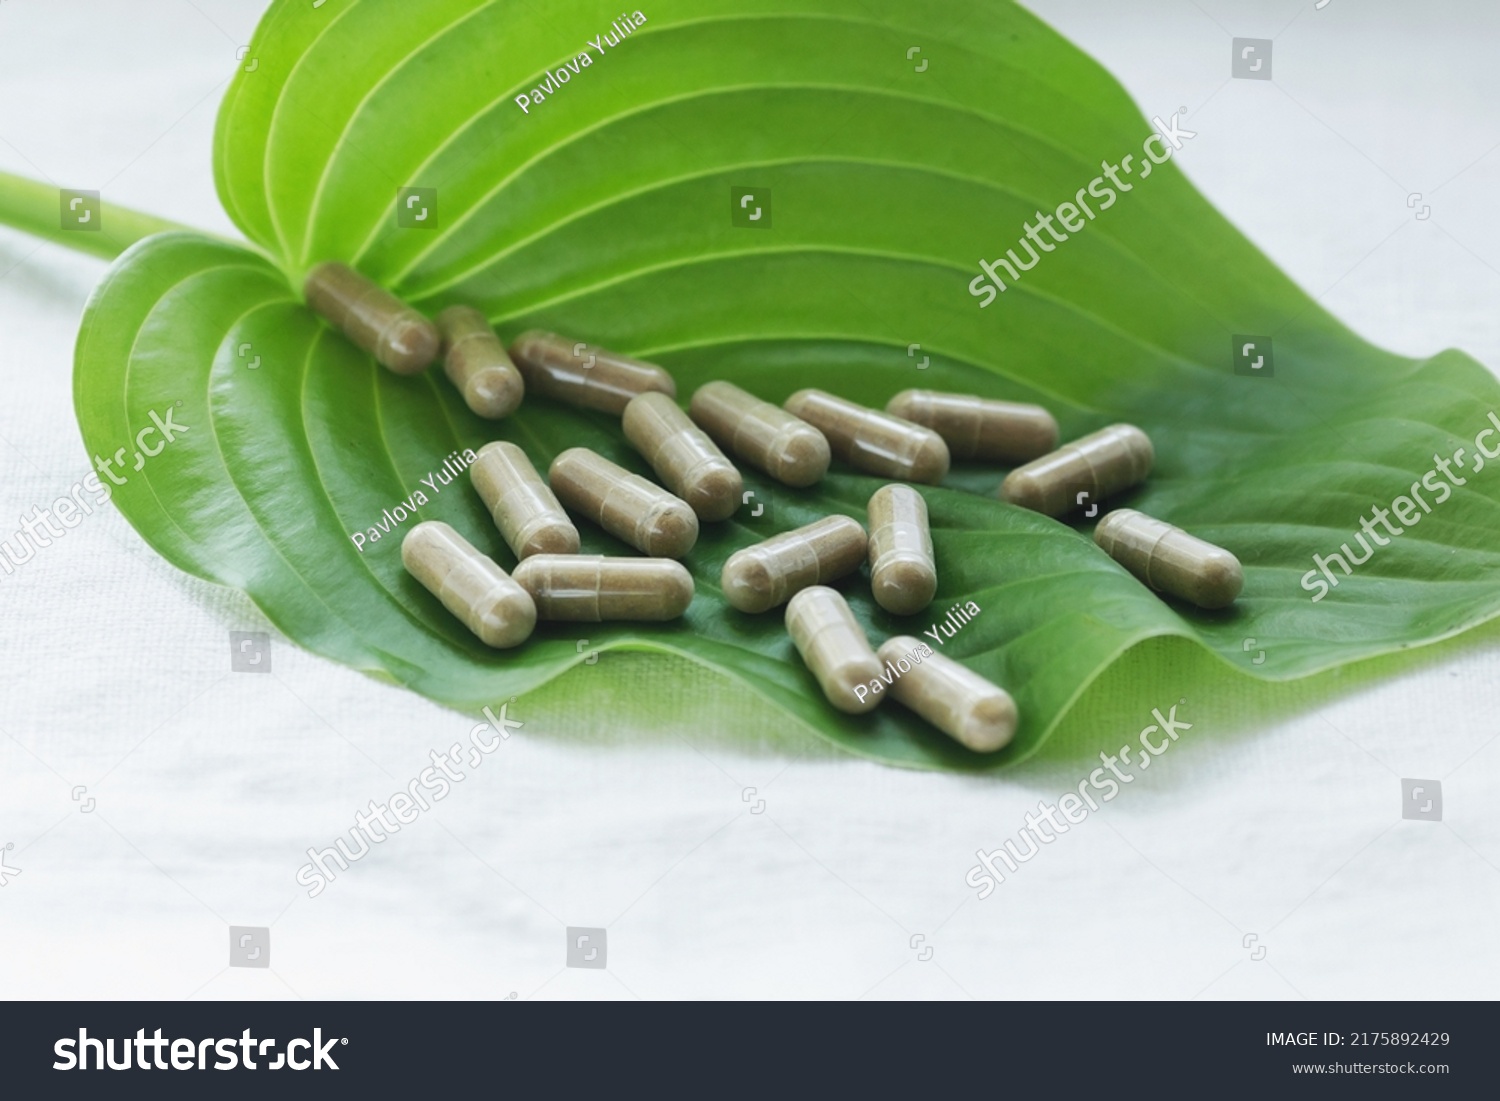 Dietary supplements or over the counter drugs on a green fresh leaf #2175892429